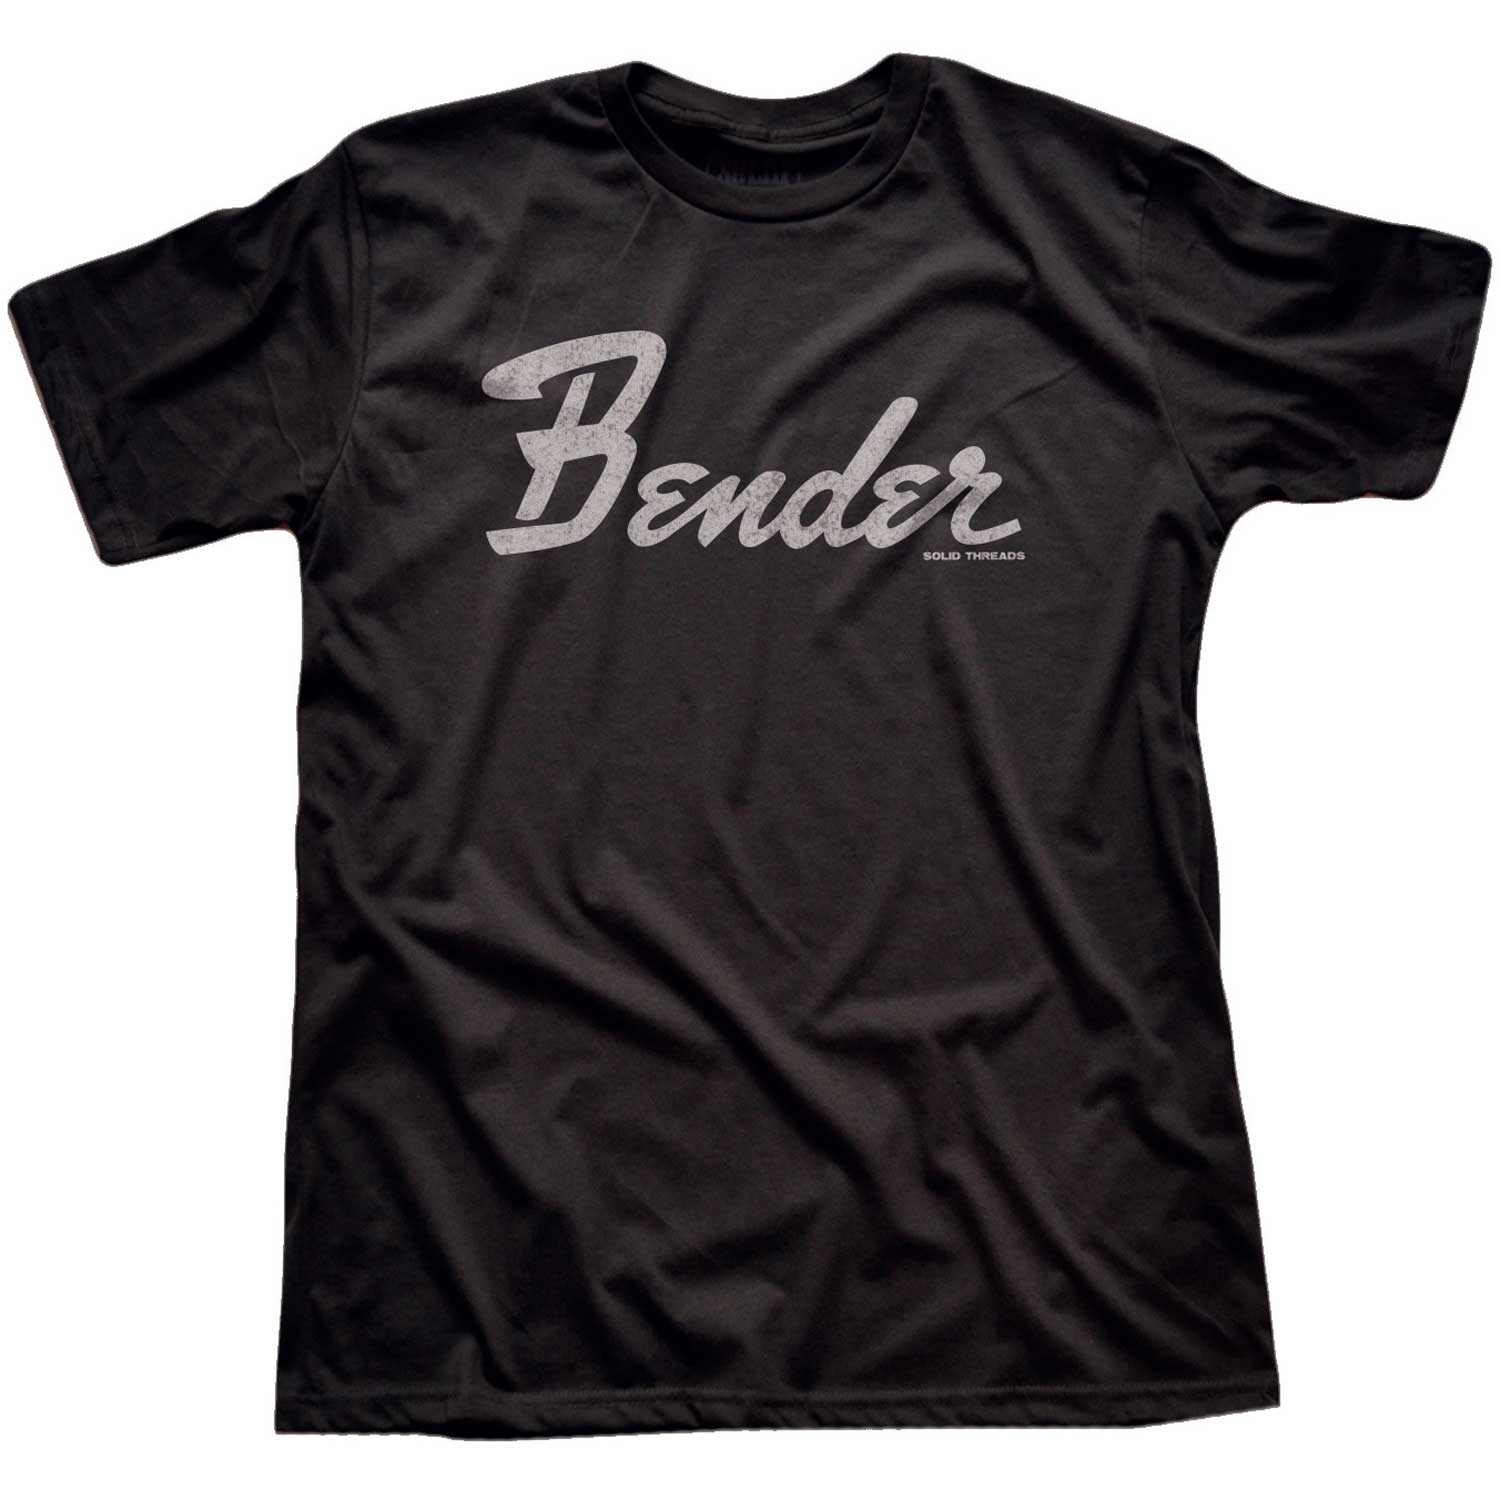 Men's Bender Vintage Party Graphic T-Shirt | Funny Music Festival Tee | Solid Threads